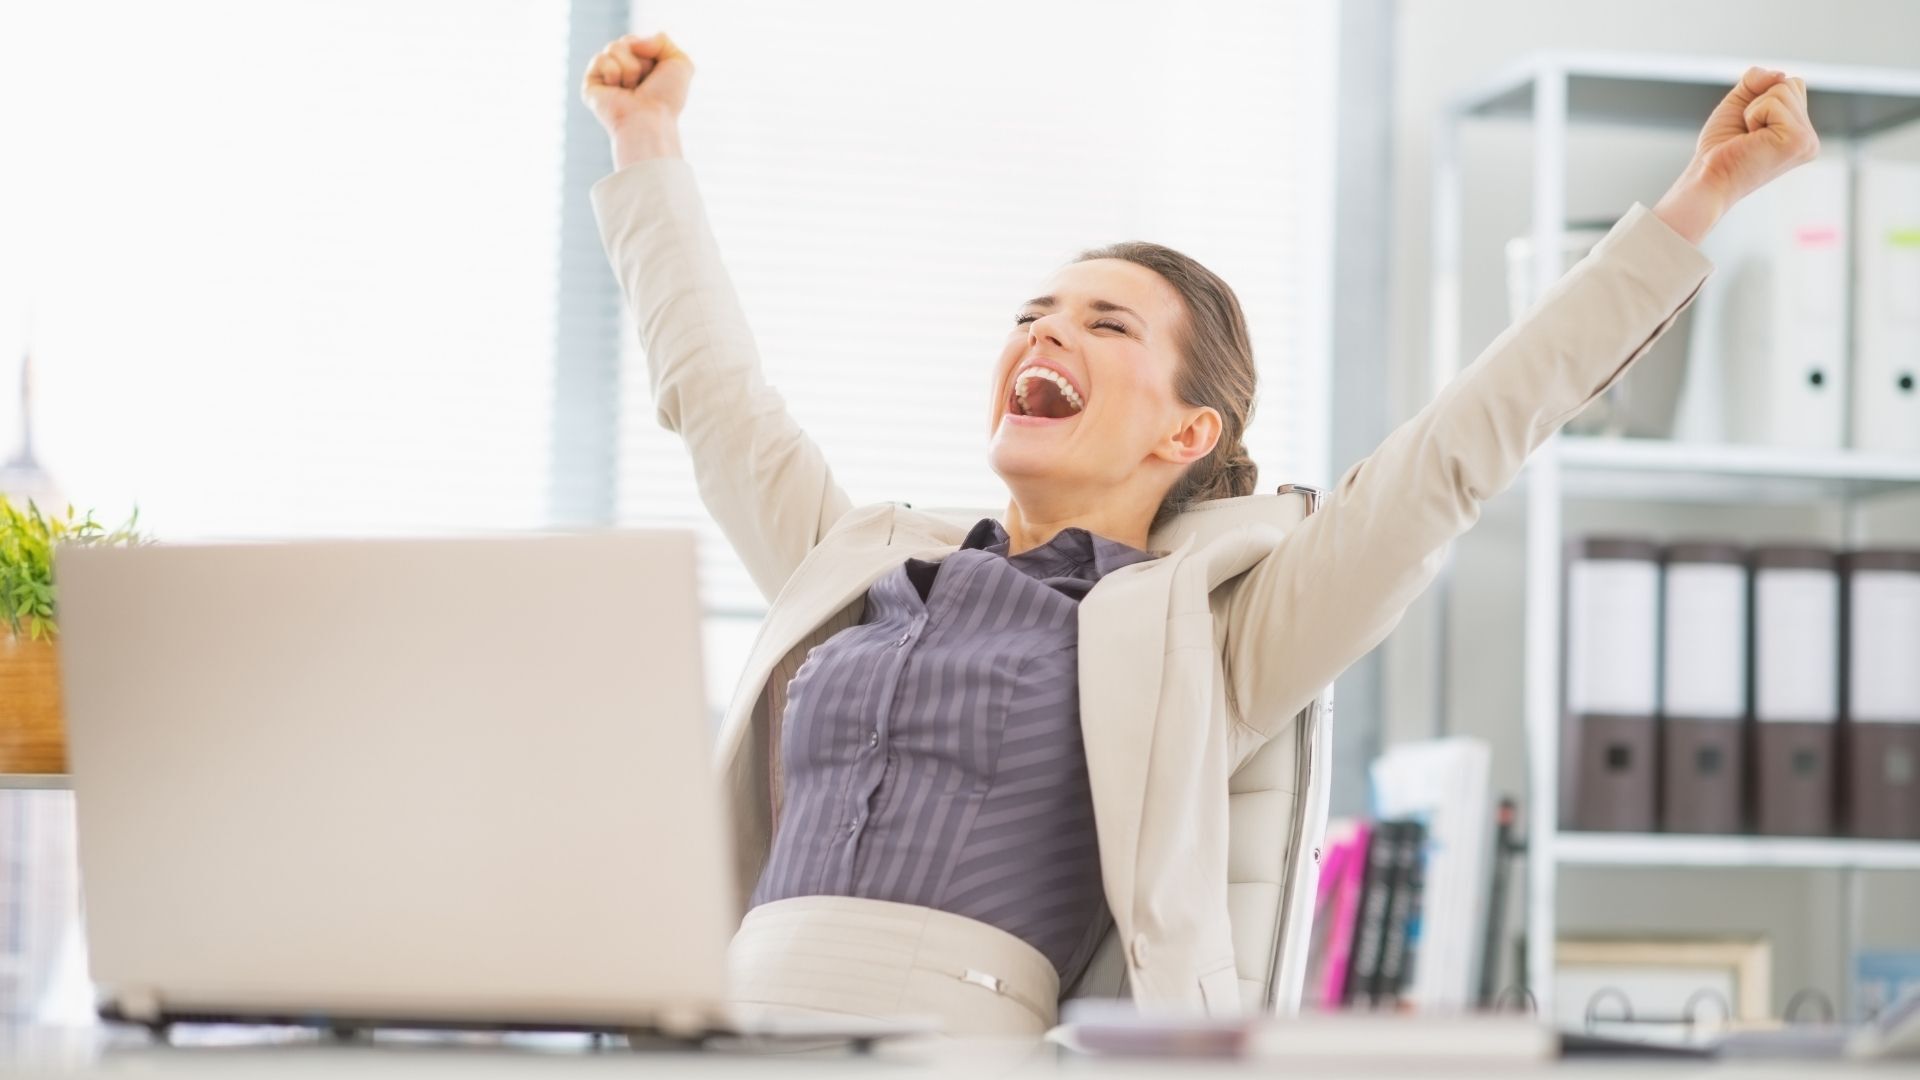 Woman Expressing Joy in Business